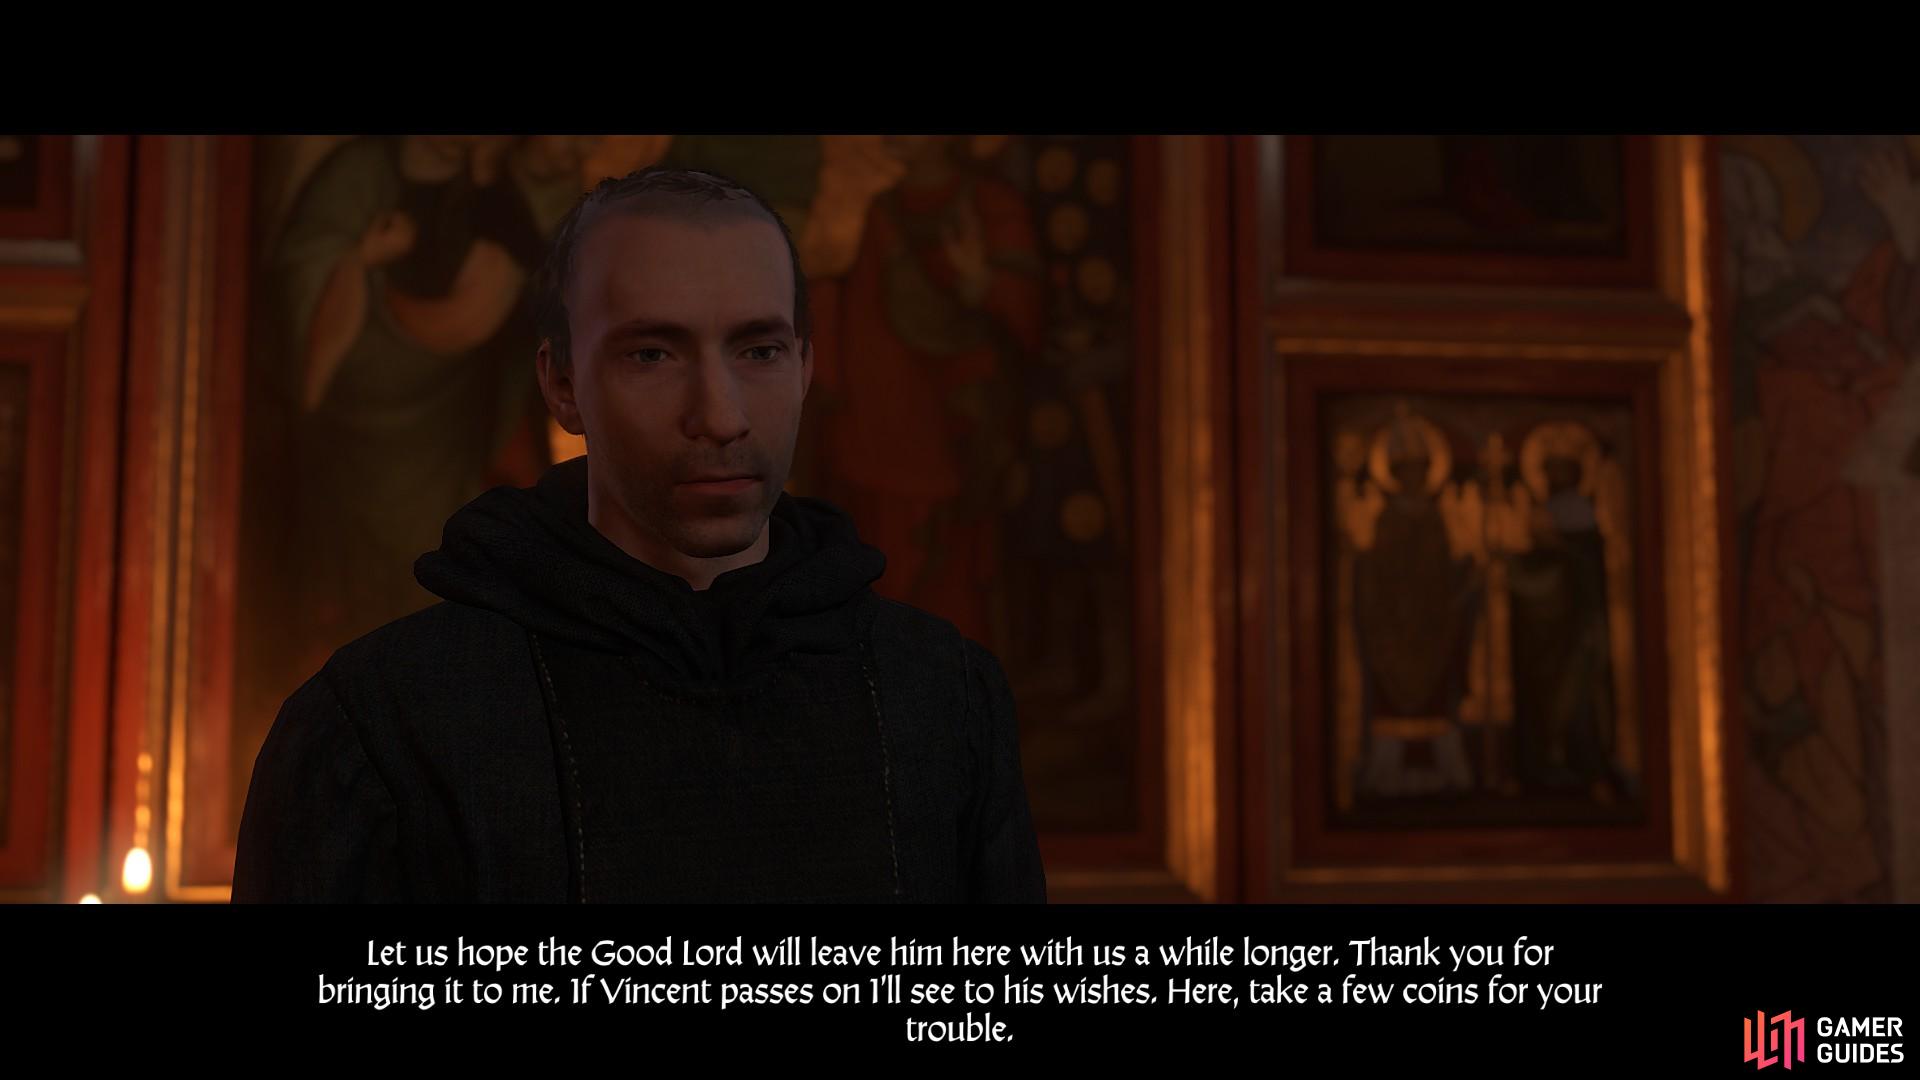 Handing Father Fabian the last will and testament of Vincent completes the quest.